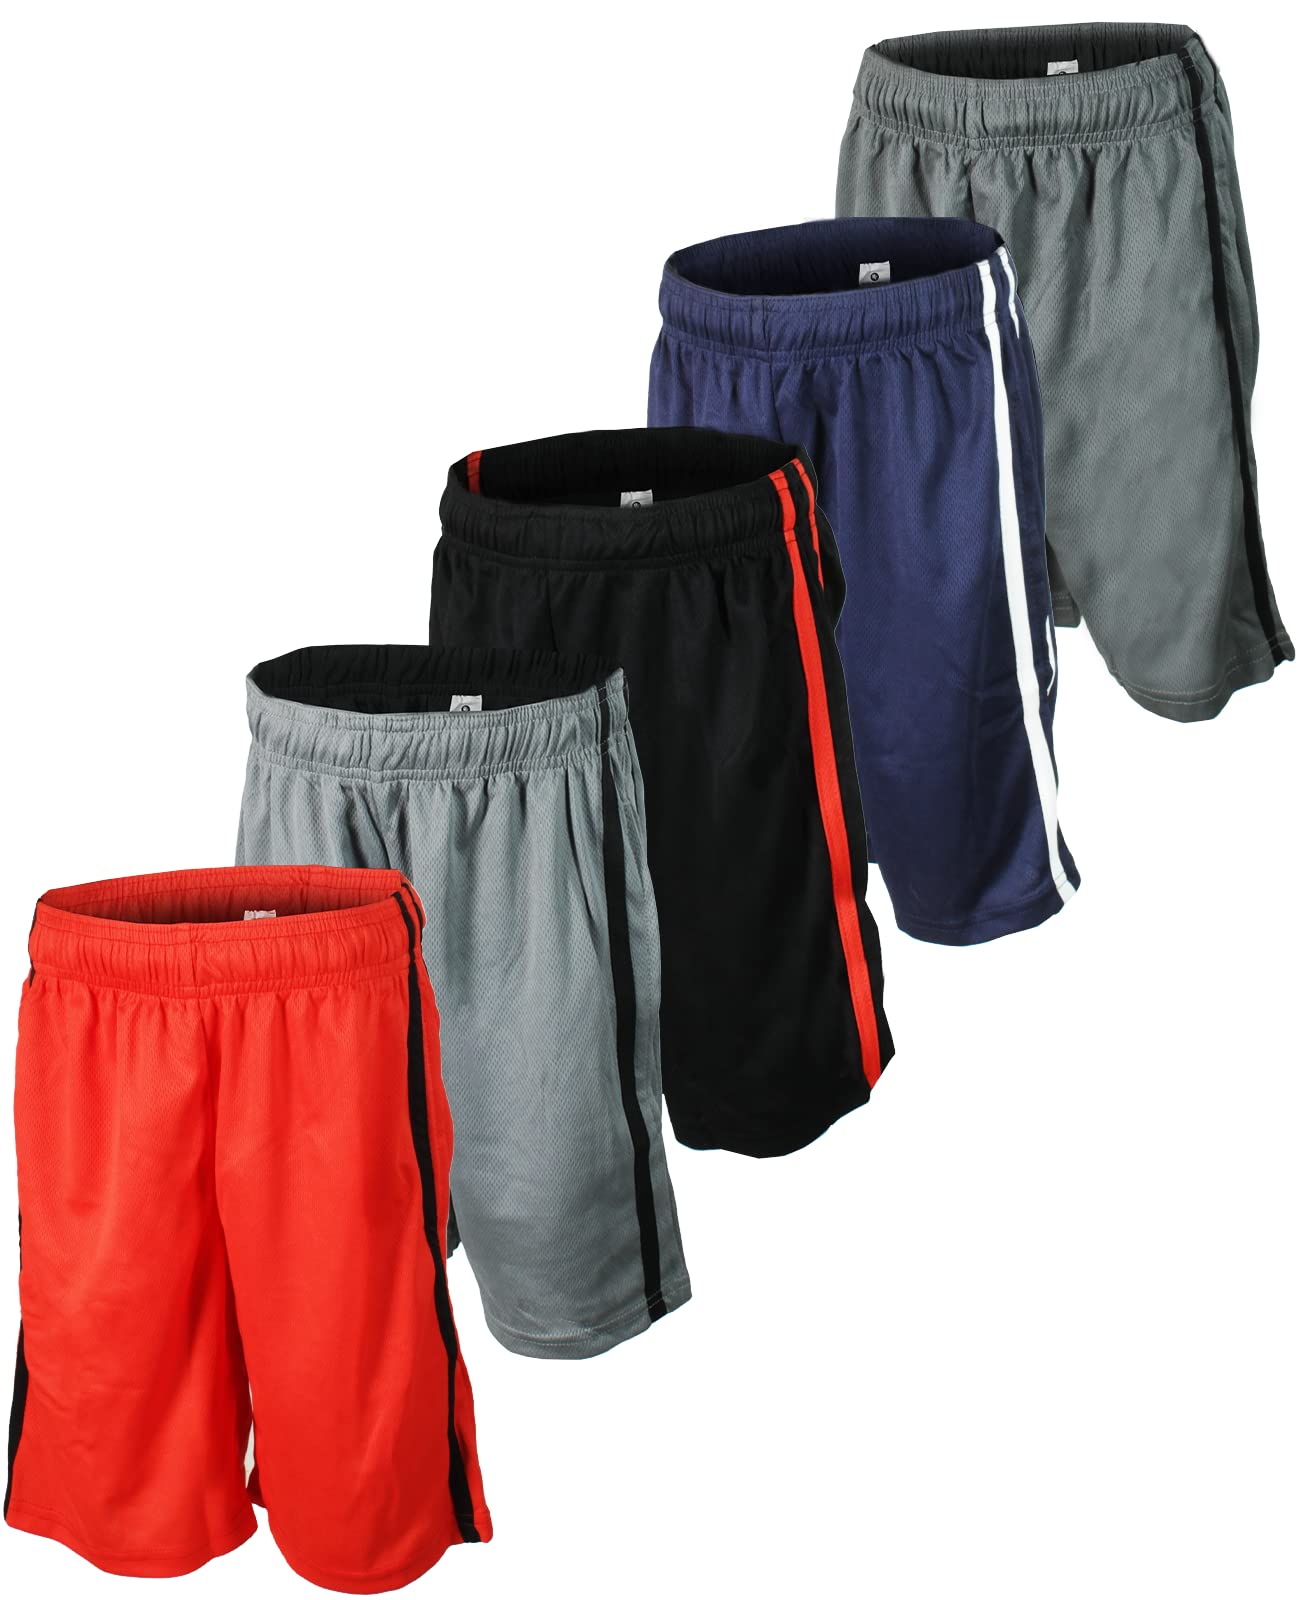 BROOKLYN VERTICAL Pack of 5 Men’s Mesh Athletic Basketball Quick Dry Shorts with Pockets for Gym, Running & Workout